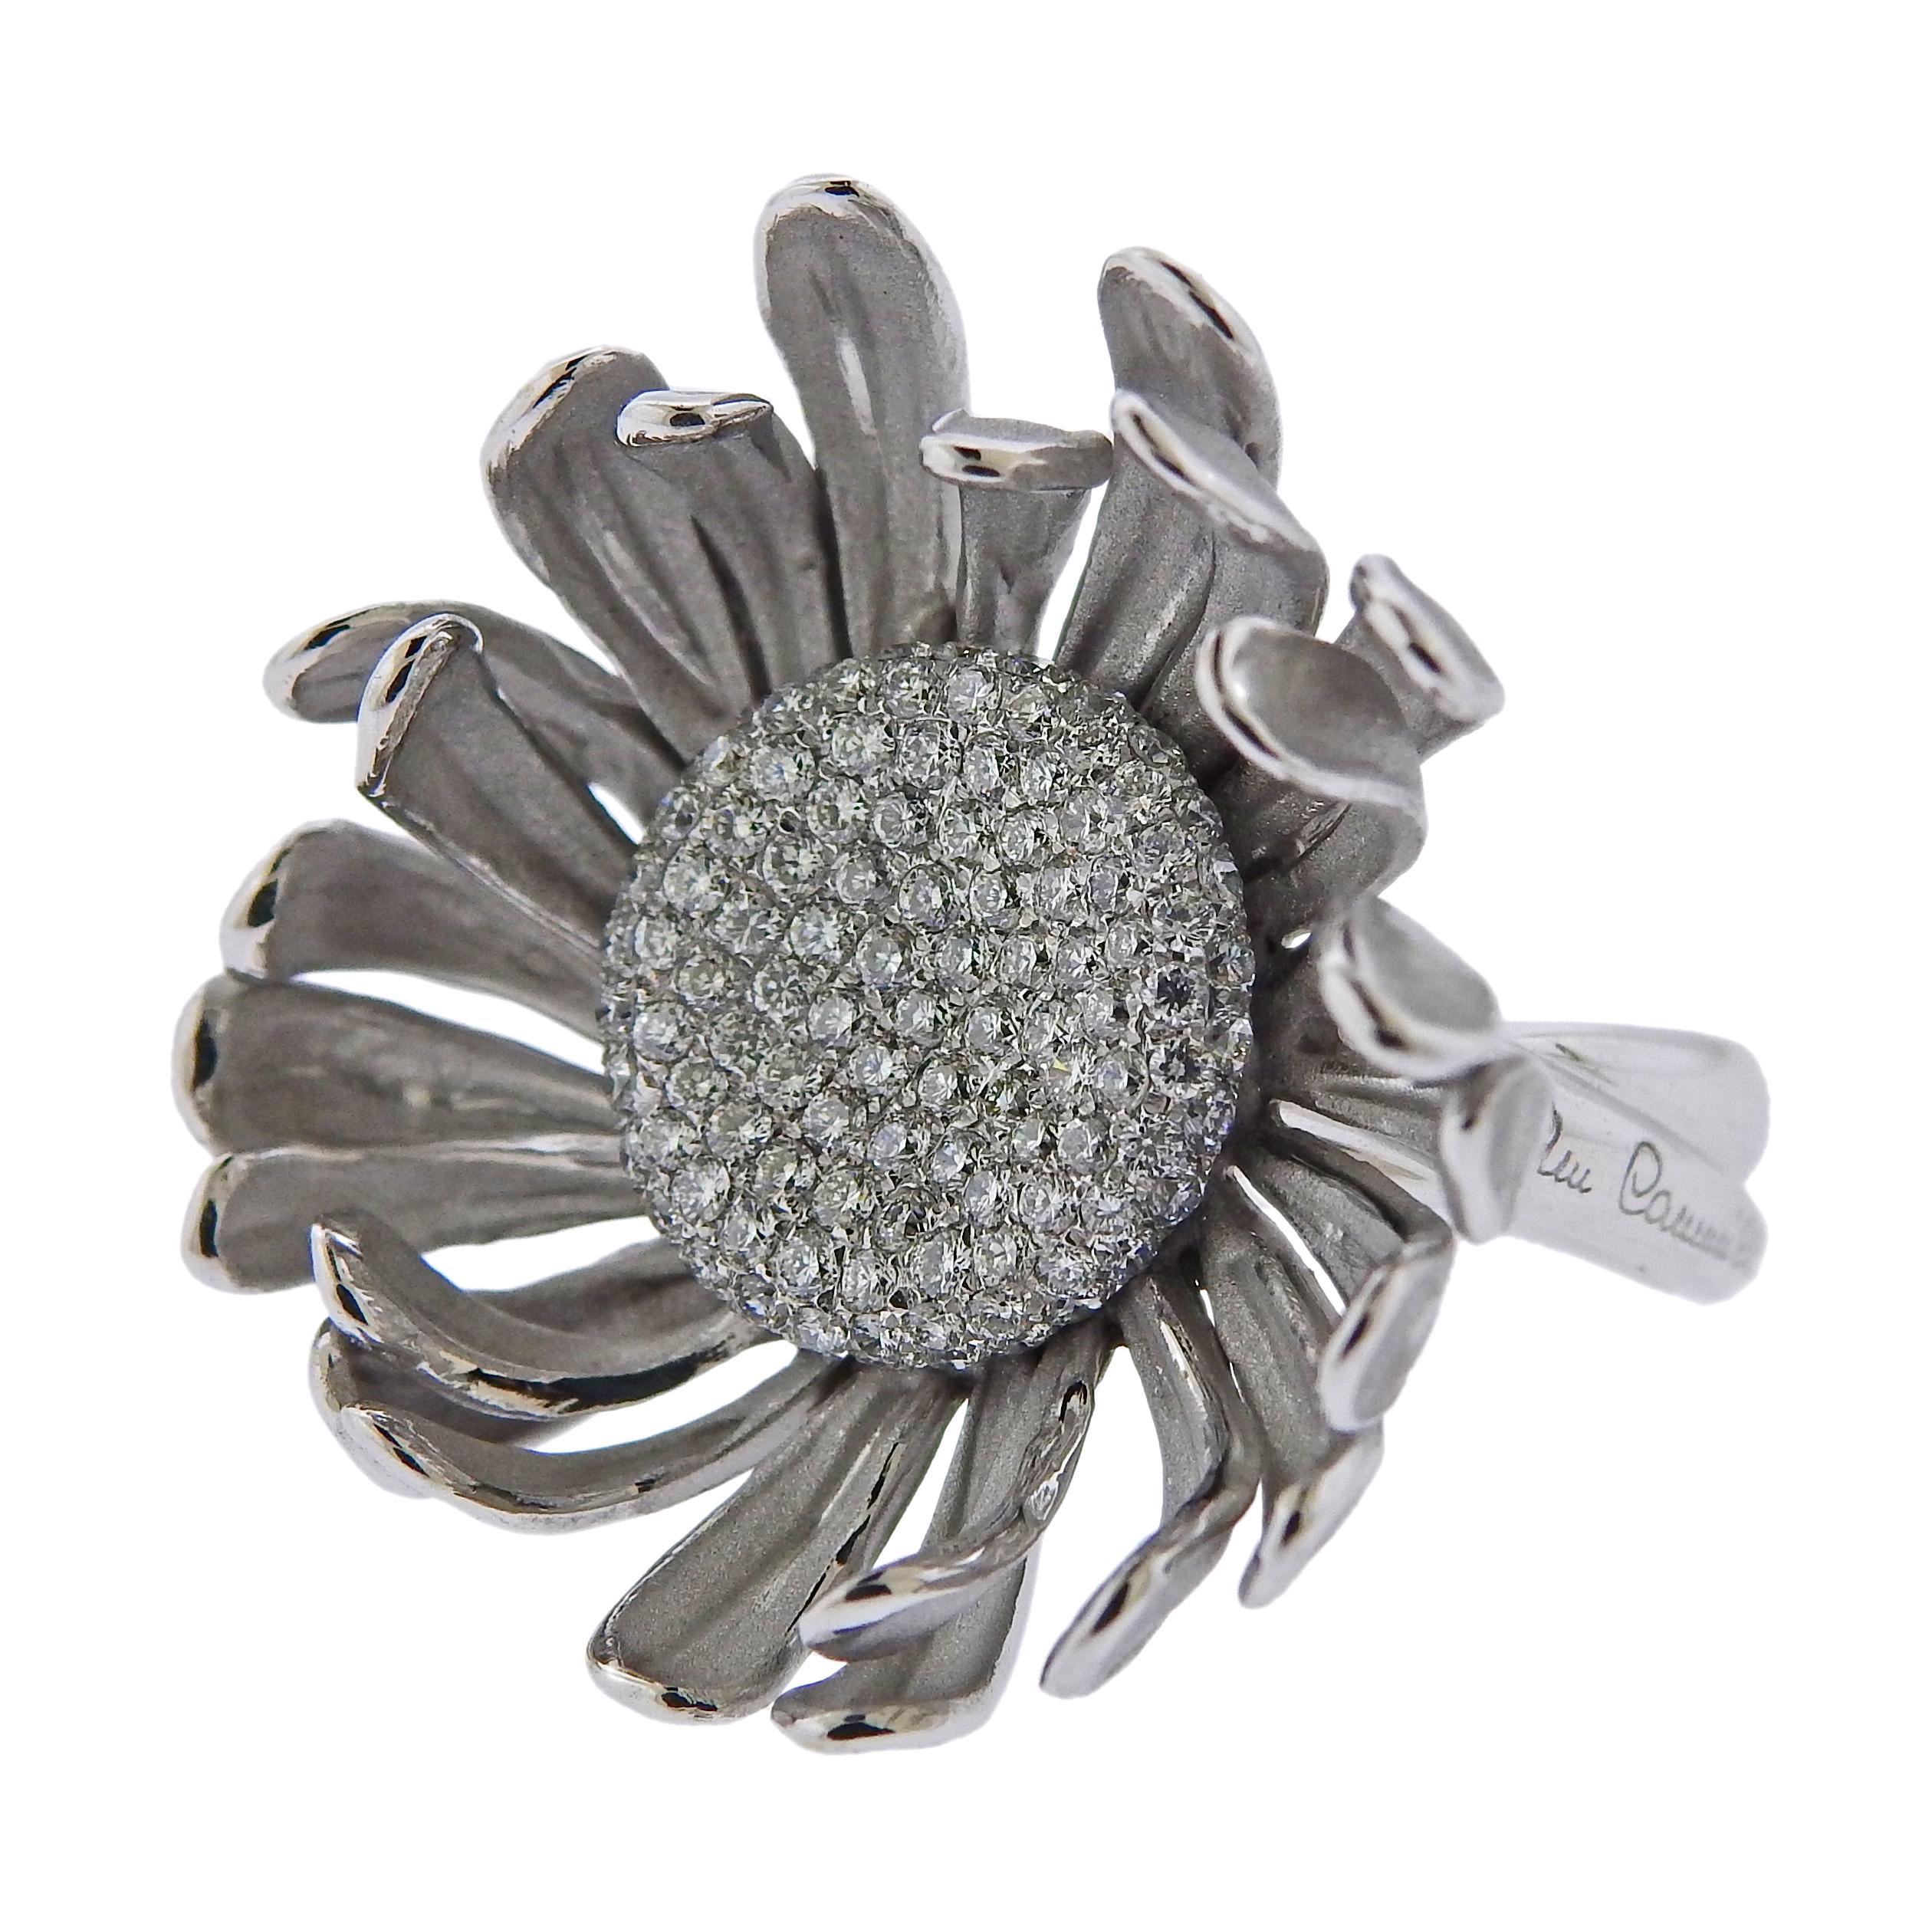 Pair of brand new 18k white gold Prelude large flower ring, by Italian designer Annamria Cammilli, set with 0.99ctw in GH/VS diamonds. Comes with box and COA, retail $9970. Ring size is 7, ring top - 30mm in diameter. Weight is 13.7 grams. Marked: